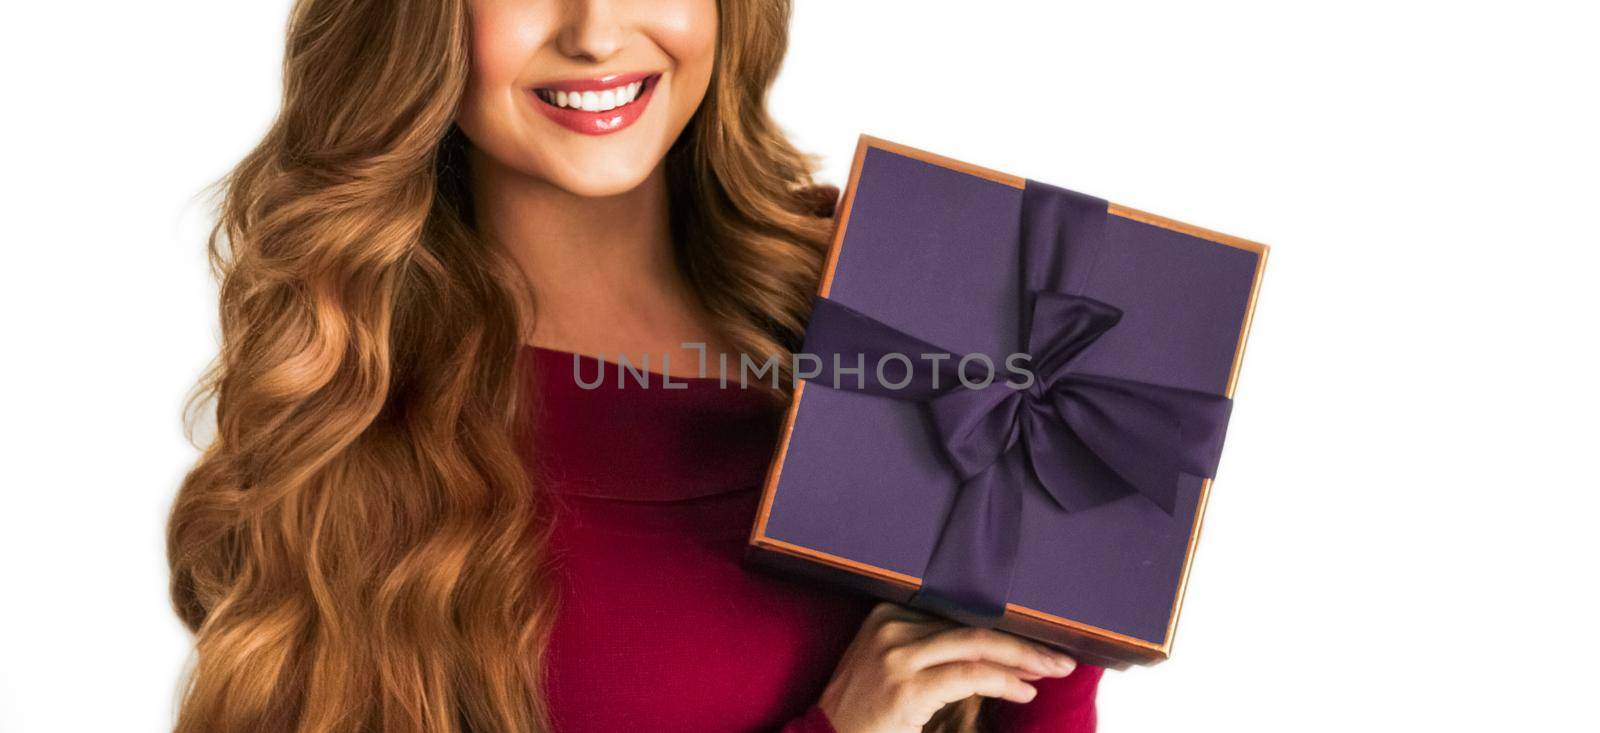 Birthday, Christmas or holiday present, happy woman holding a green gift or luxury beauty box subscription delivery isolated on white background by Anneleven